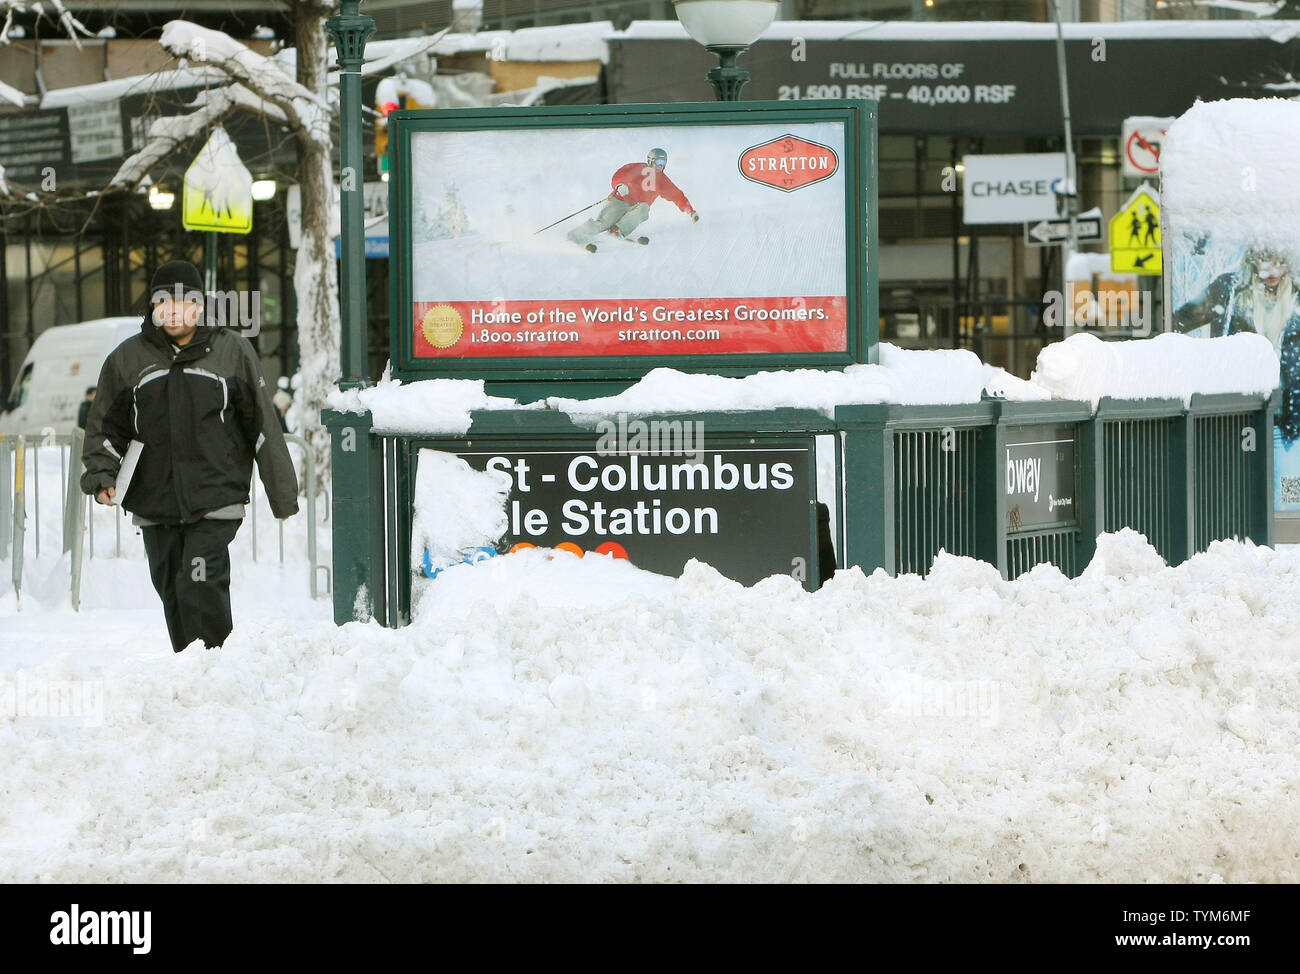 Snowbanks surround a subway entrance in Midtown after a major storm dumped around 19 inches of snow on January 27, 2011 in New York City. The storm caused suspension of may city bus lines and closed all public schools as this month became the snowiest January in New York City history.     UPI /Monika Graff Stock Photo